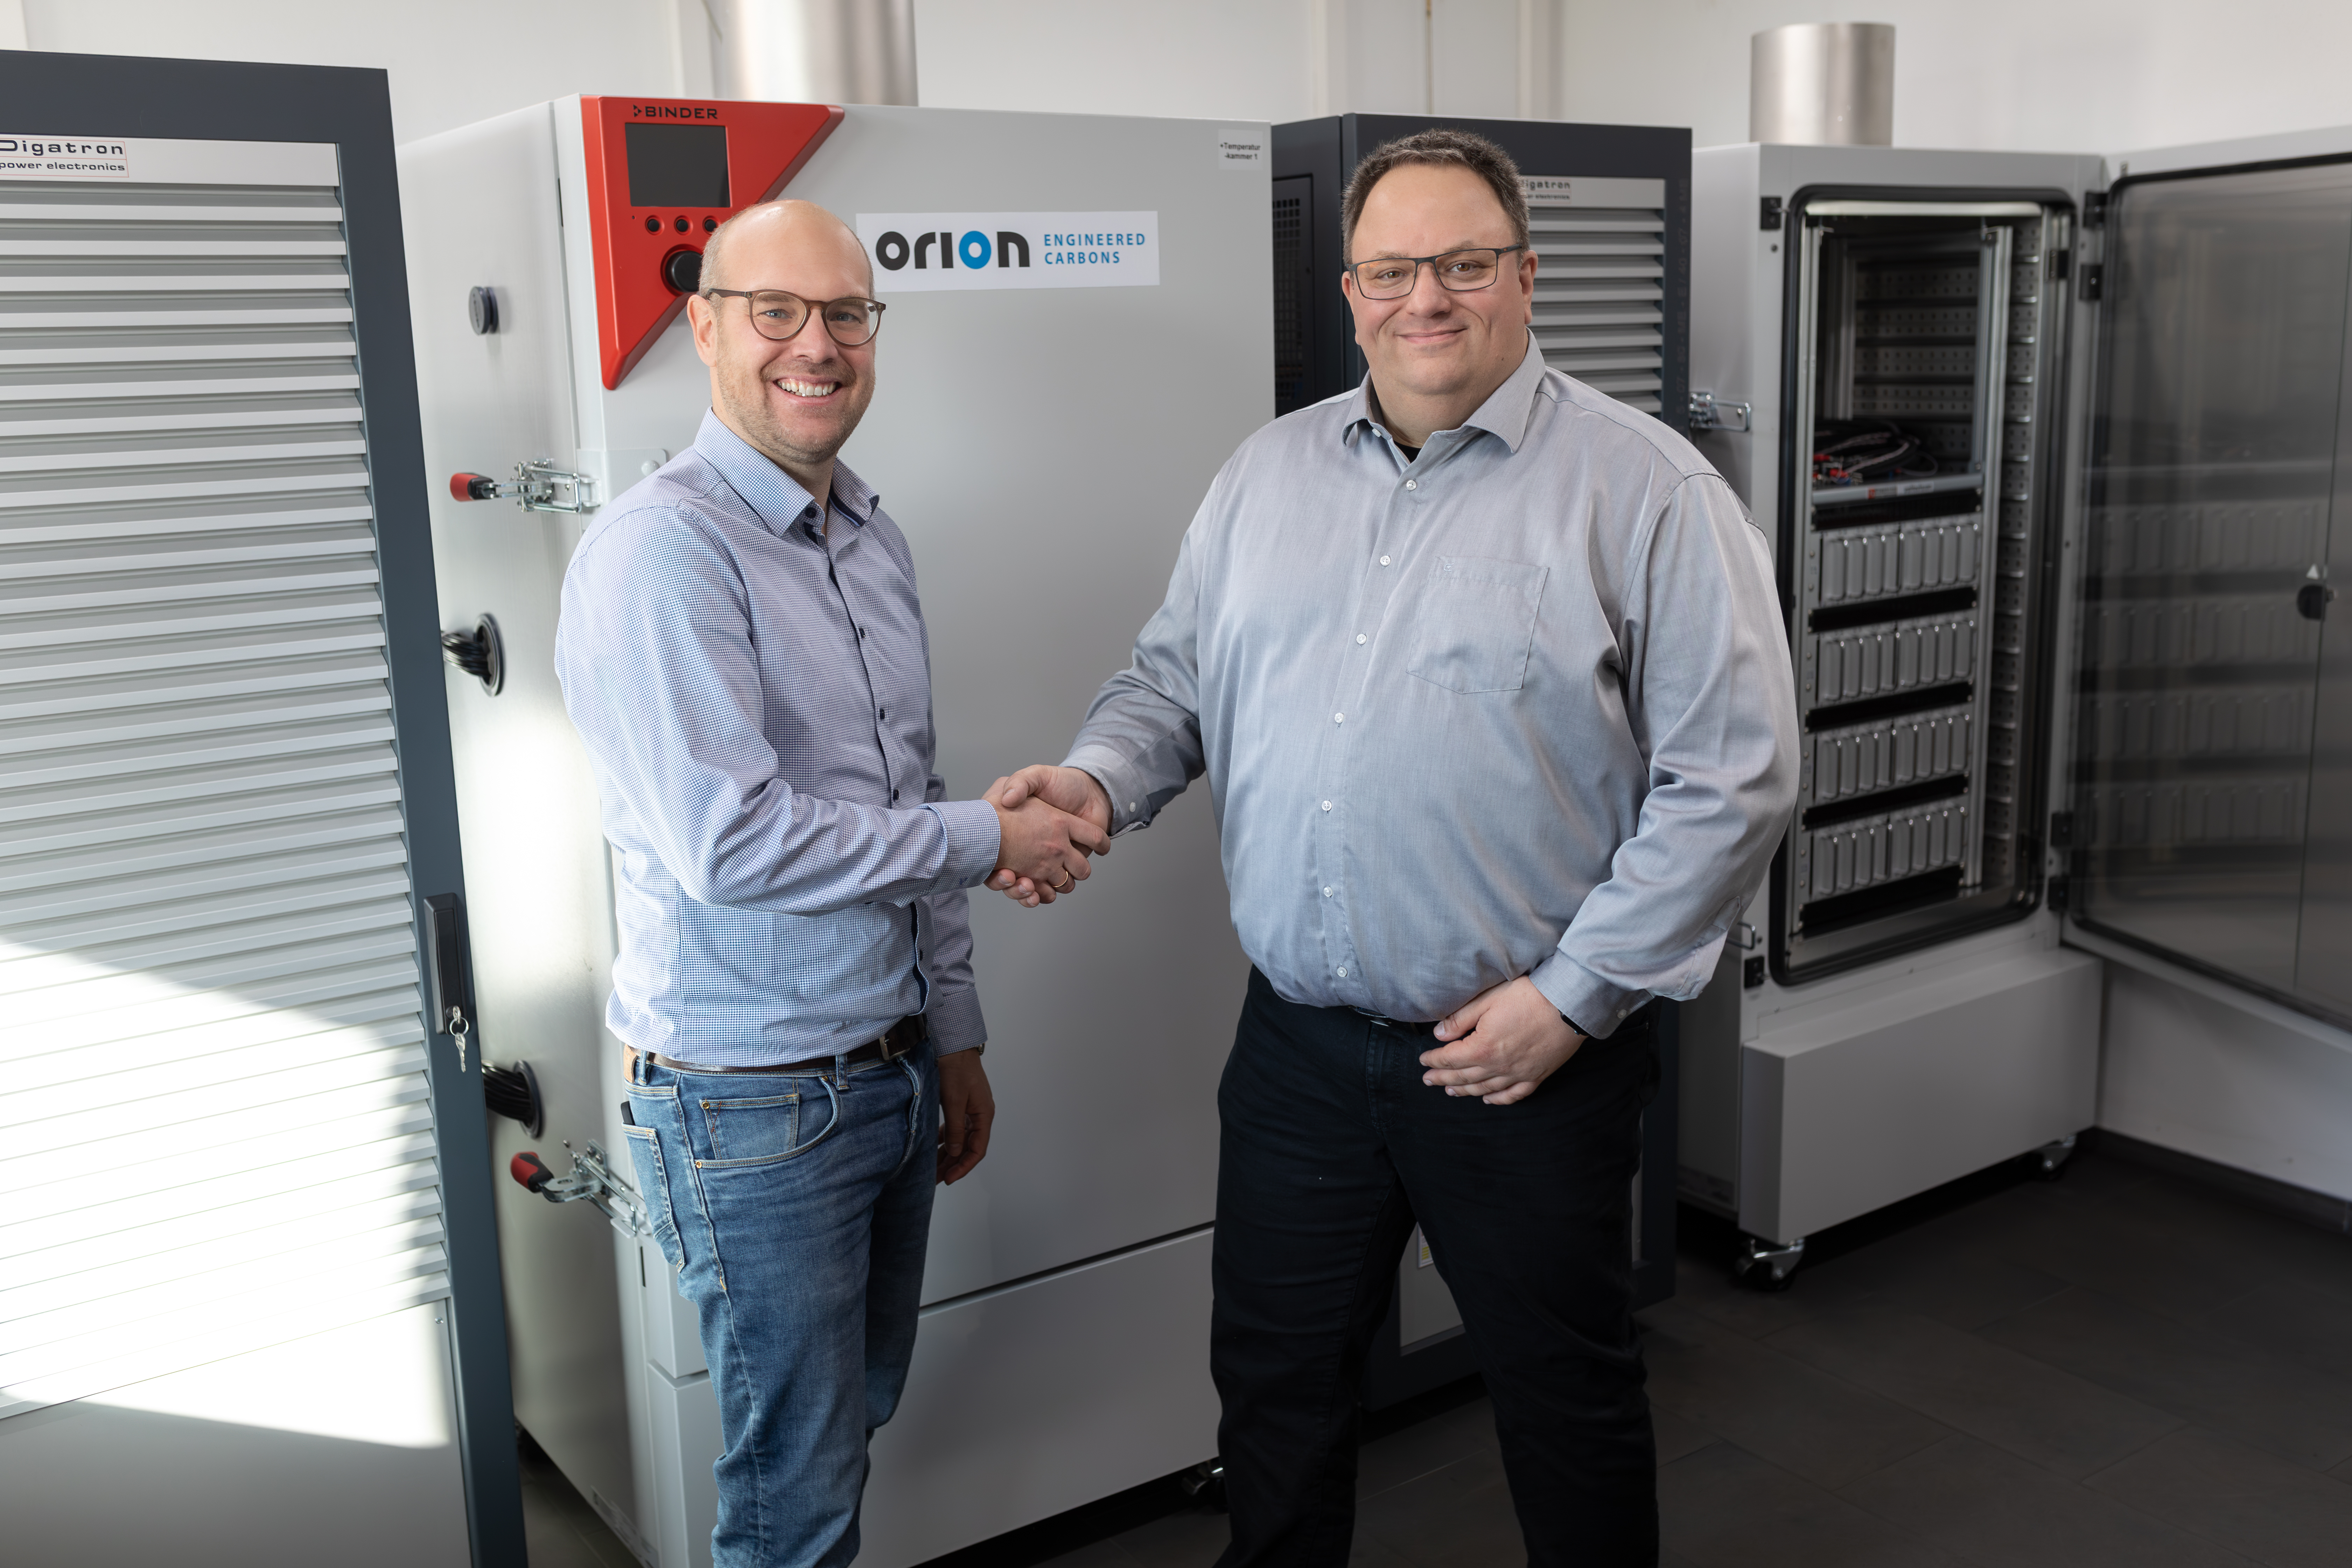 Digatron & Orion together in the picture (from left to right): Martin Hennebrüder (Project Manager - Digatron Power Electronics), Dr. Dietmar Jansen (Chemist Energy Systems - Orion)